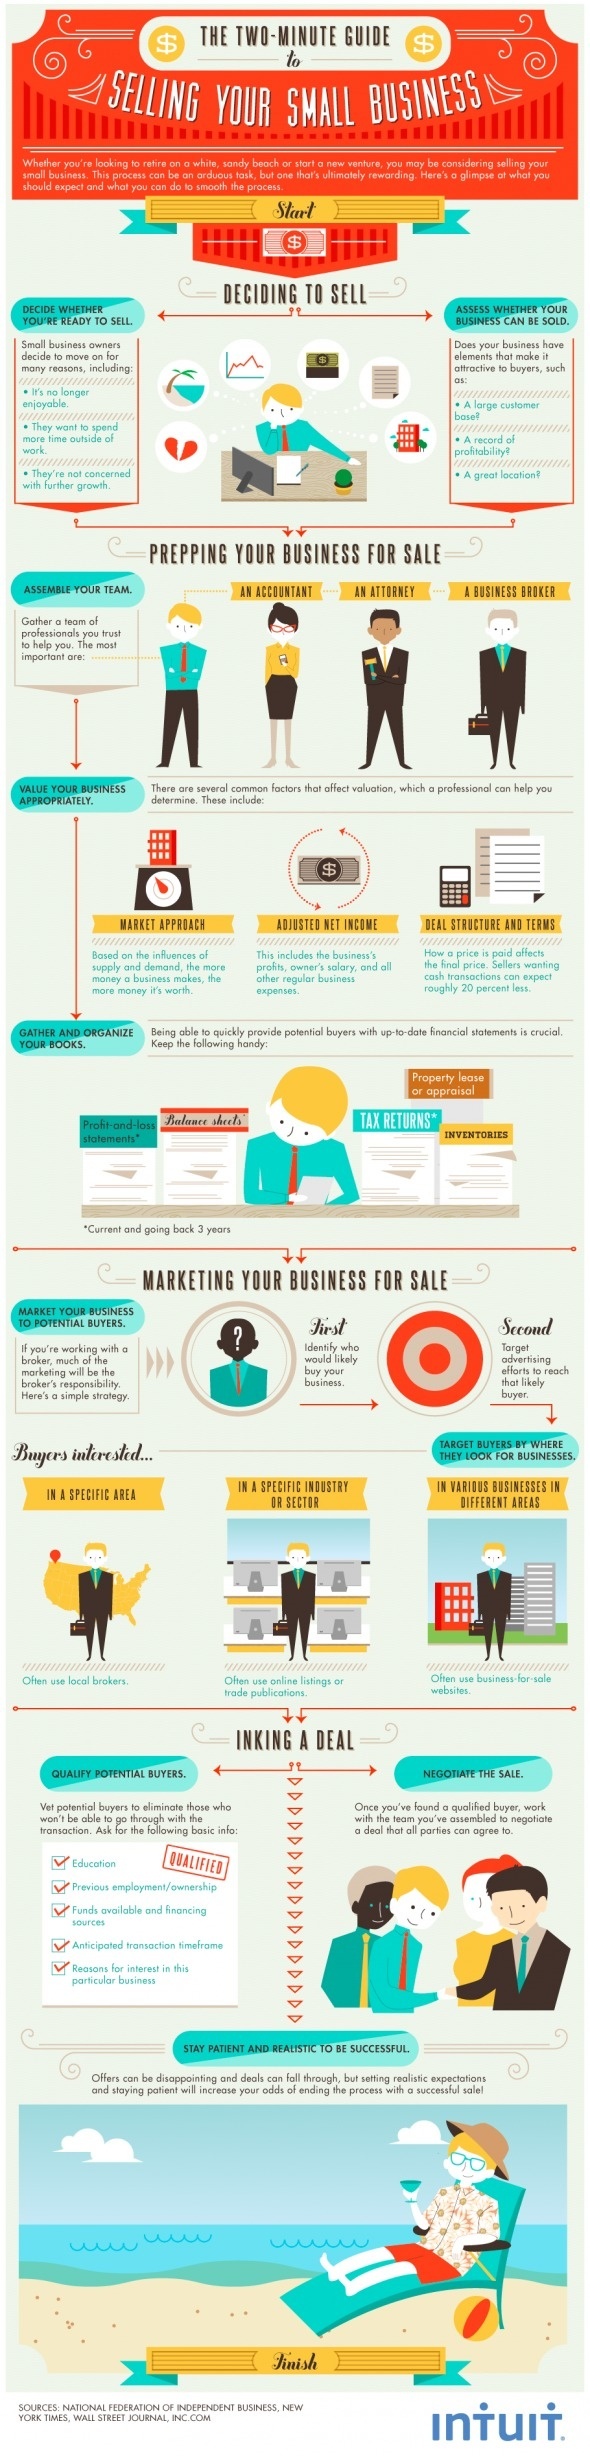 Selling your business infographic #sell #infographic #business